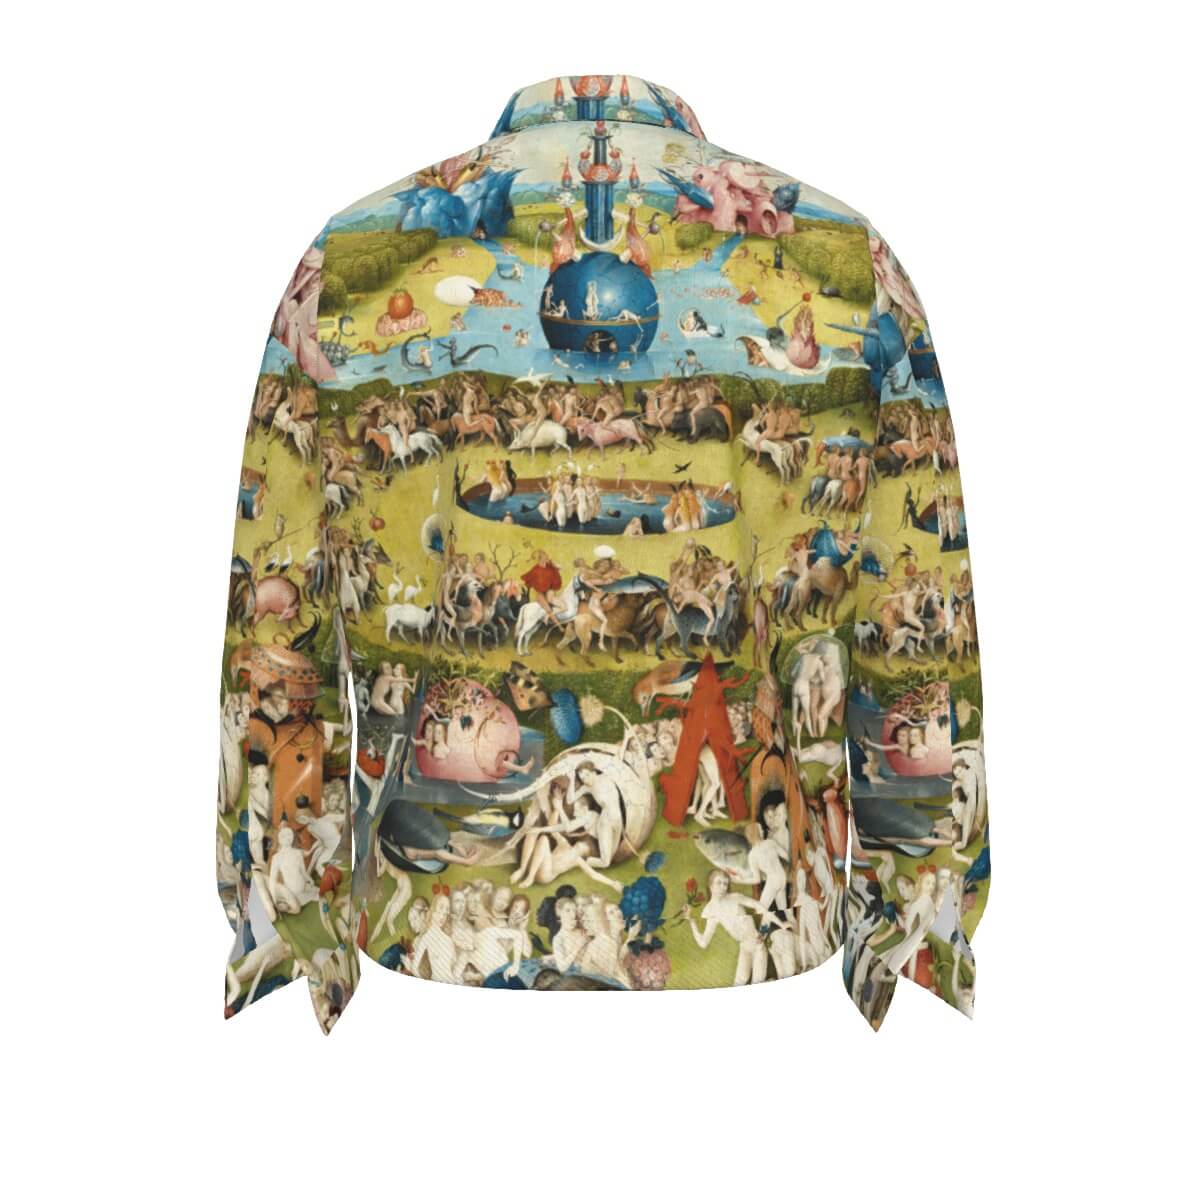 Artistic Outerwear with Earthly Delights